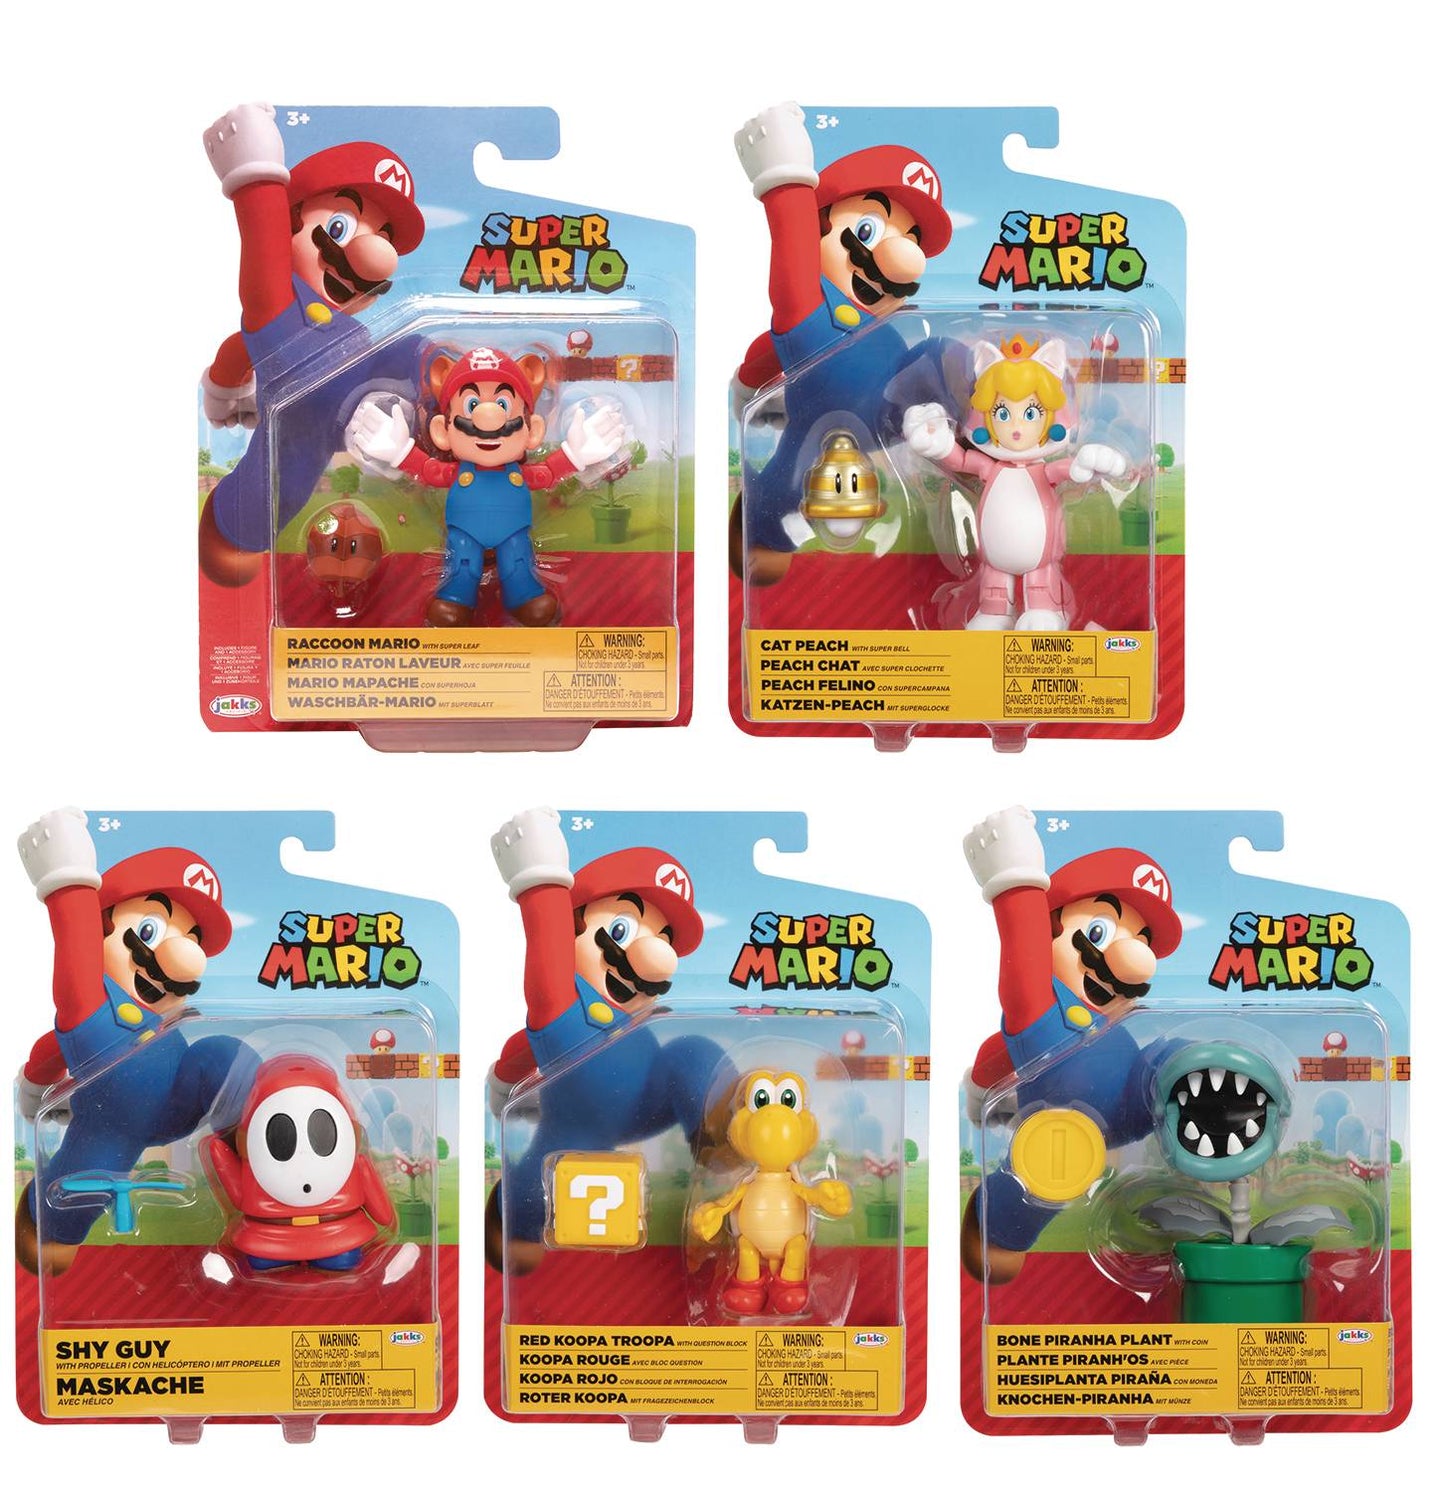 World of Nintendo Super Mario 4-Inch Figures - Cat Peach with Bell